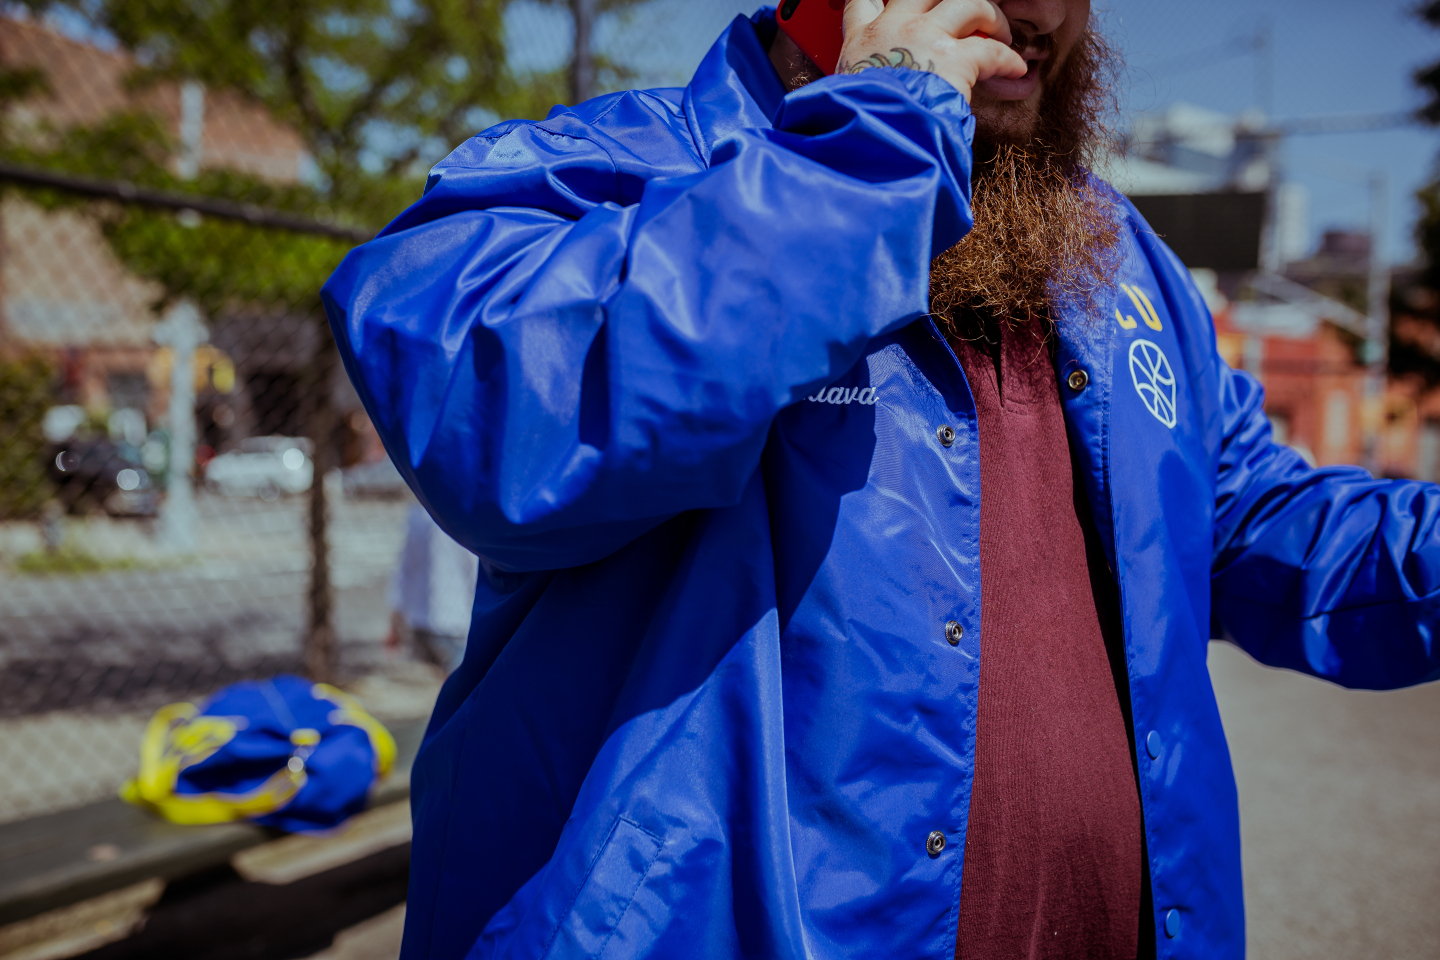 Action Bronson Packer Shoes Starter BCU collection 1